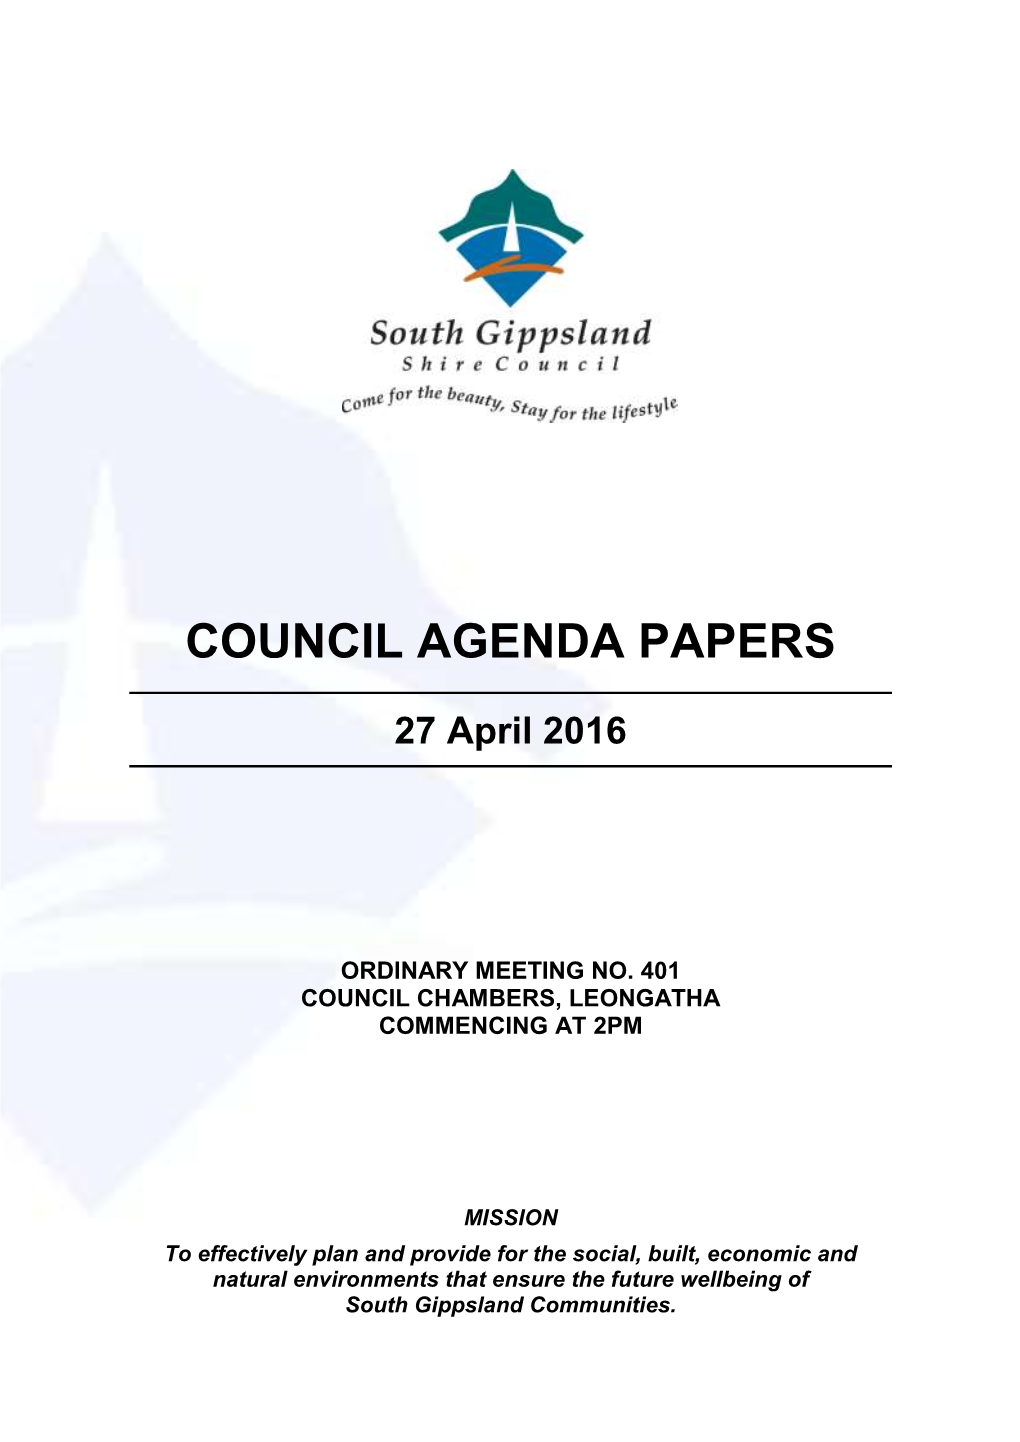 Council Agenda Papers